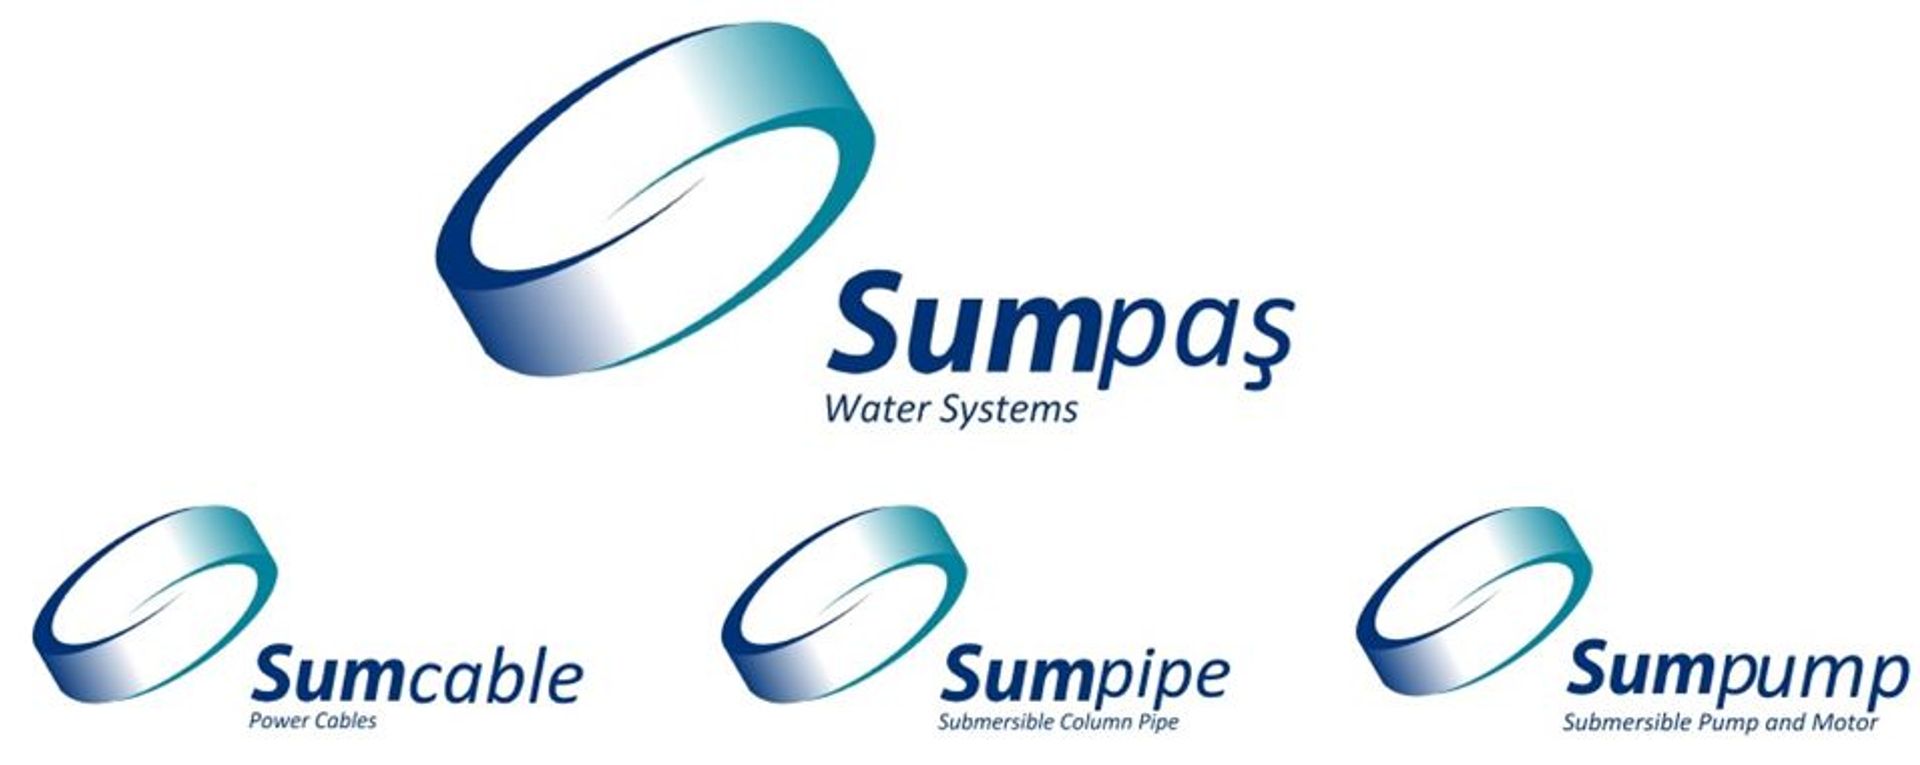 SUMPAS Submersible Pump & Motor, Zero Ring Pipes and Drilling